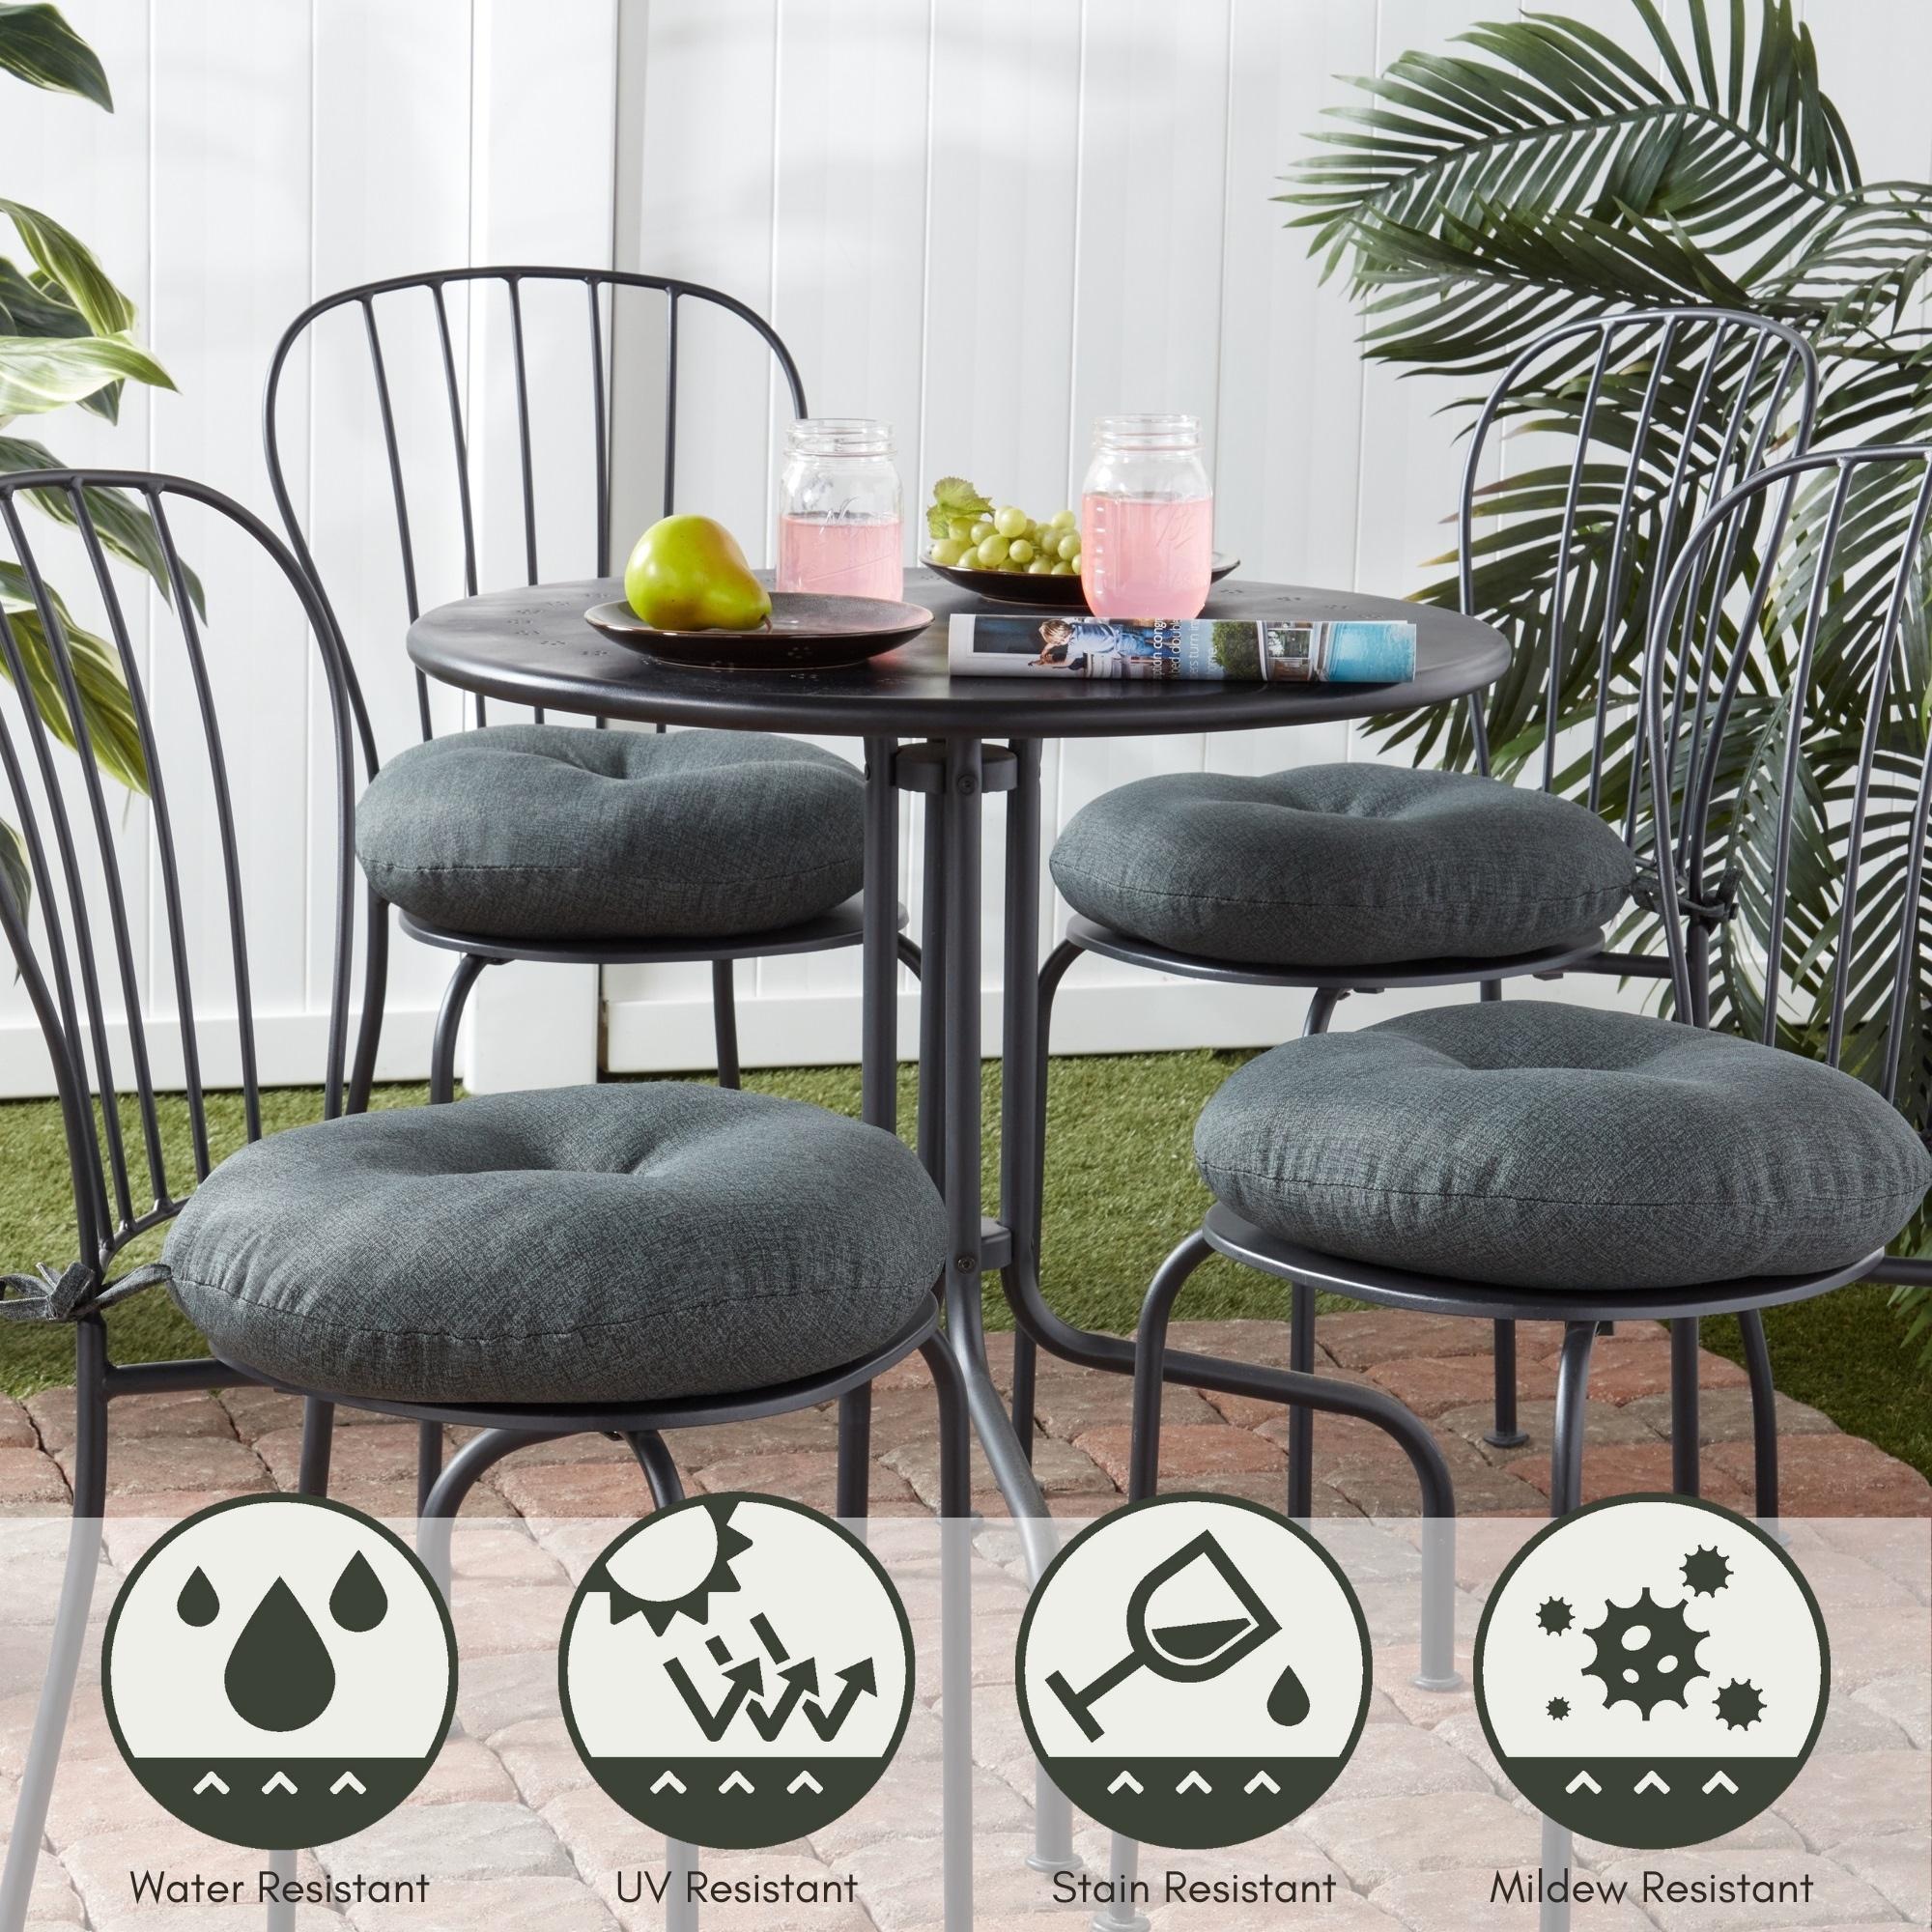 Greendale Home Fashions Carbon 15 in. Round Outdoor Reversible Bistro Seat Cushion (Set of 2) - image 5 of 6